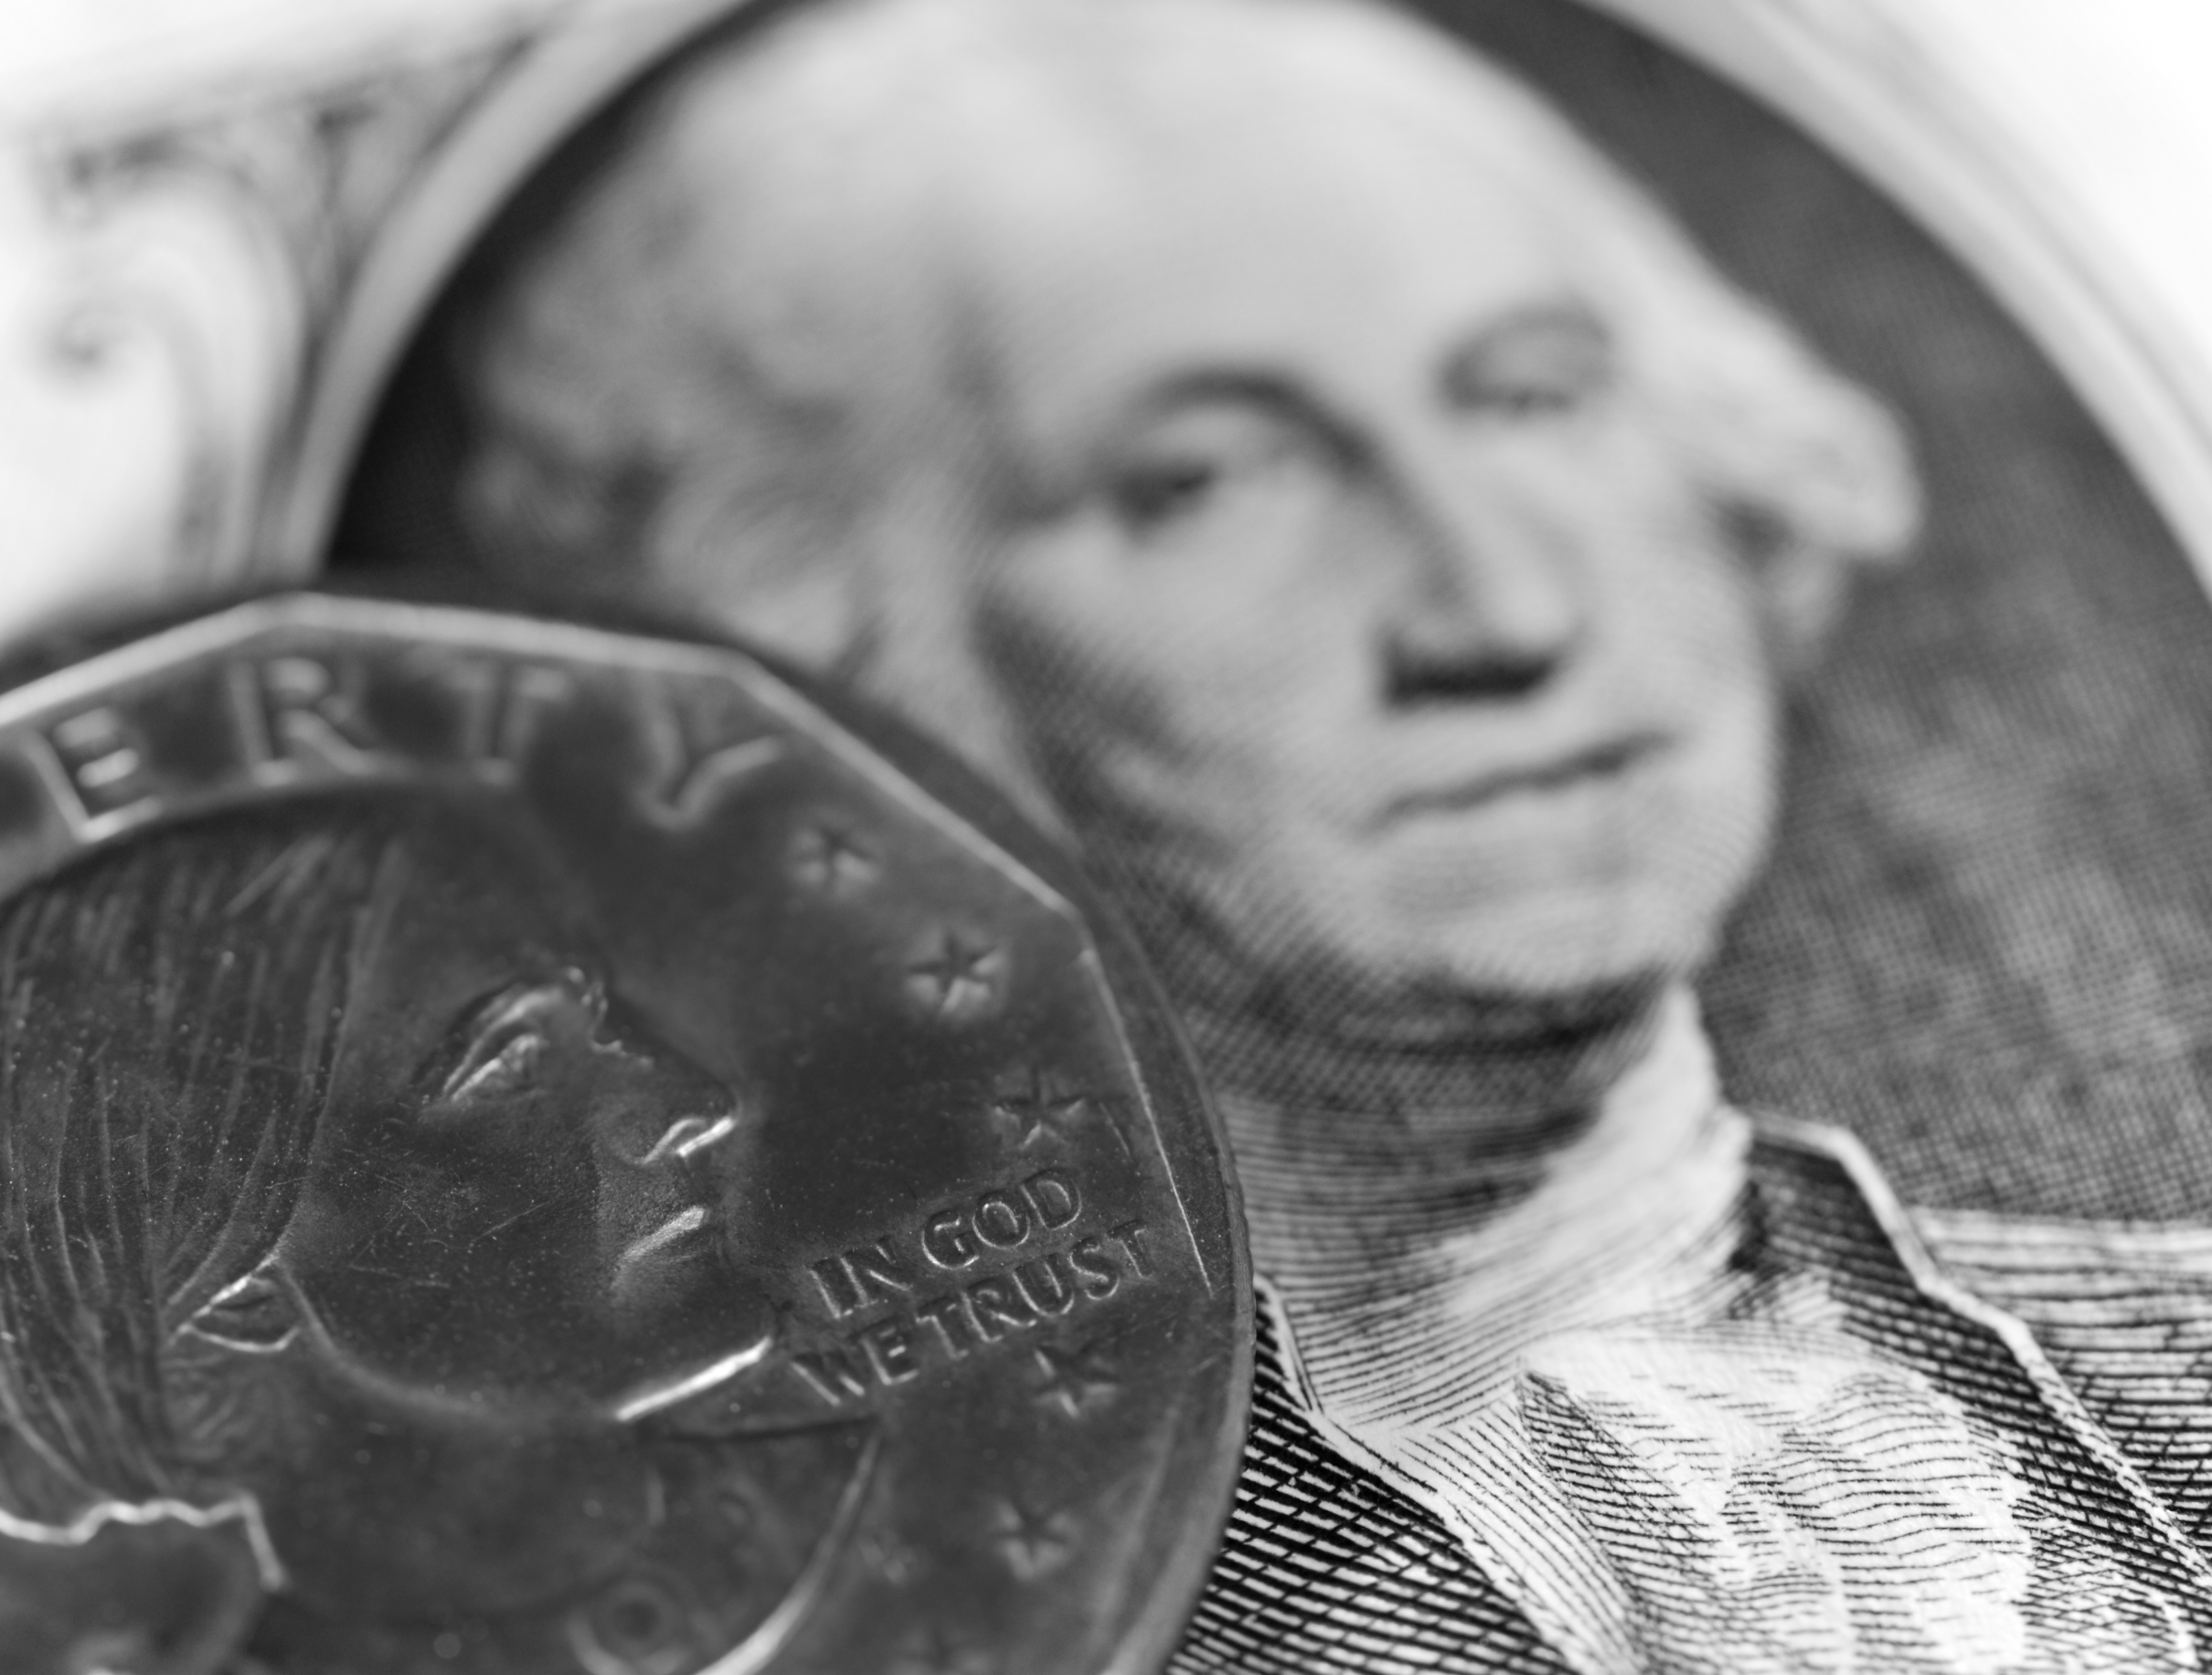 Susan B. Anthony dollar coin resting next to image of George Washington on a dollar bill.